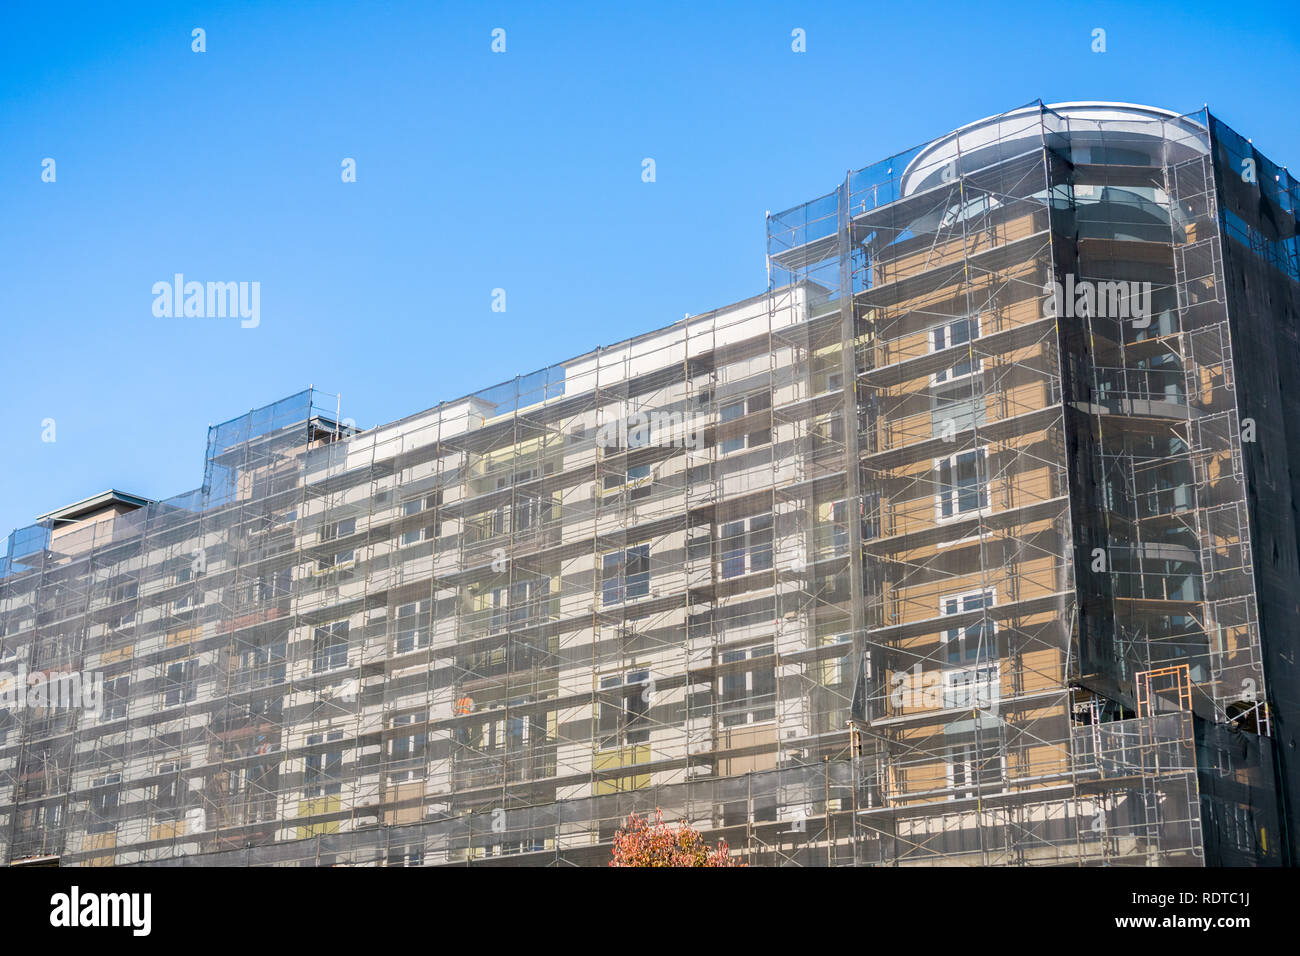 New and modern, multilevel apartment complexes are being built in Sunnyvale, San Francisco bay area, California Stock Photo